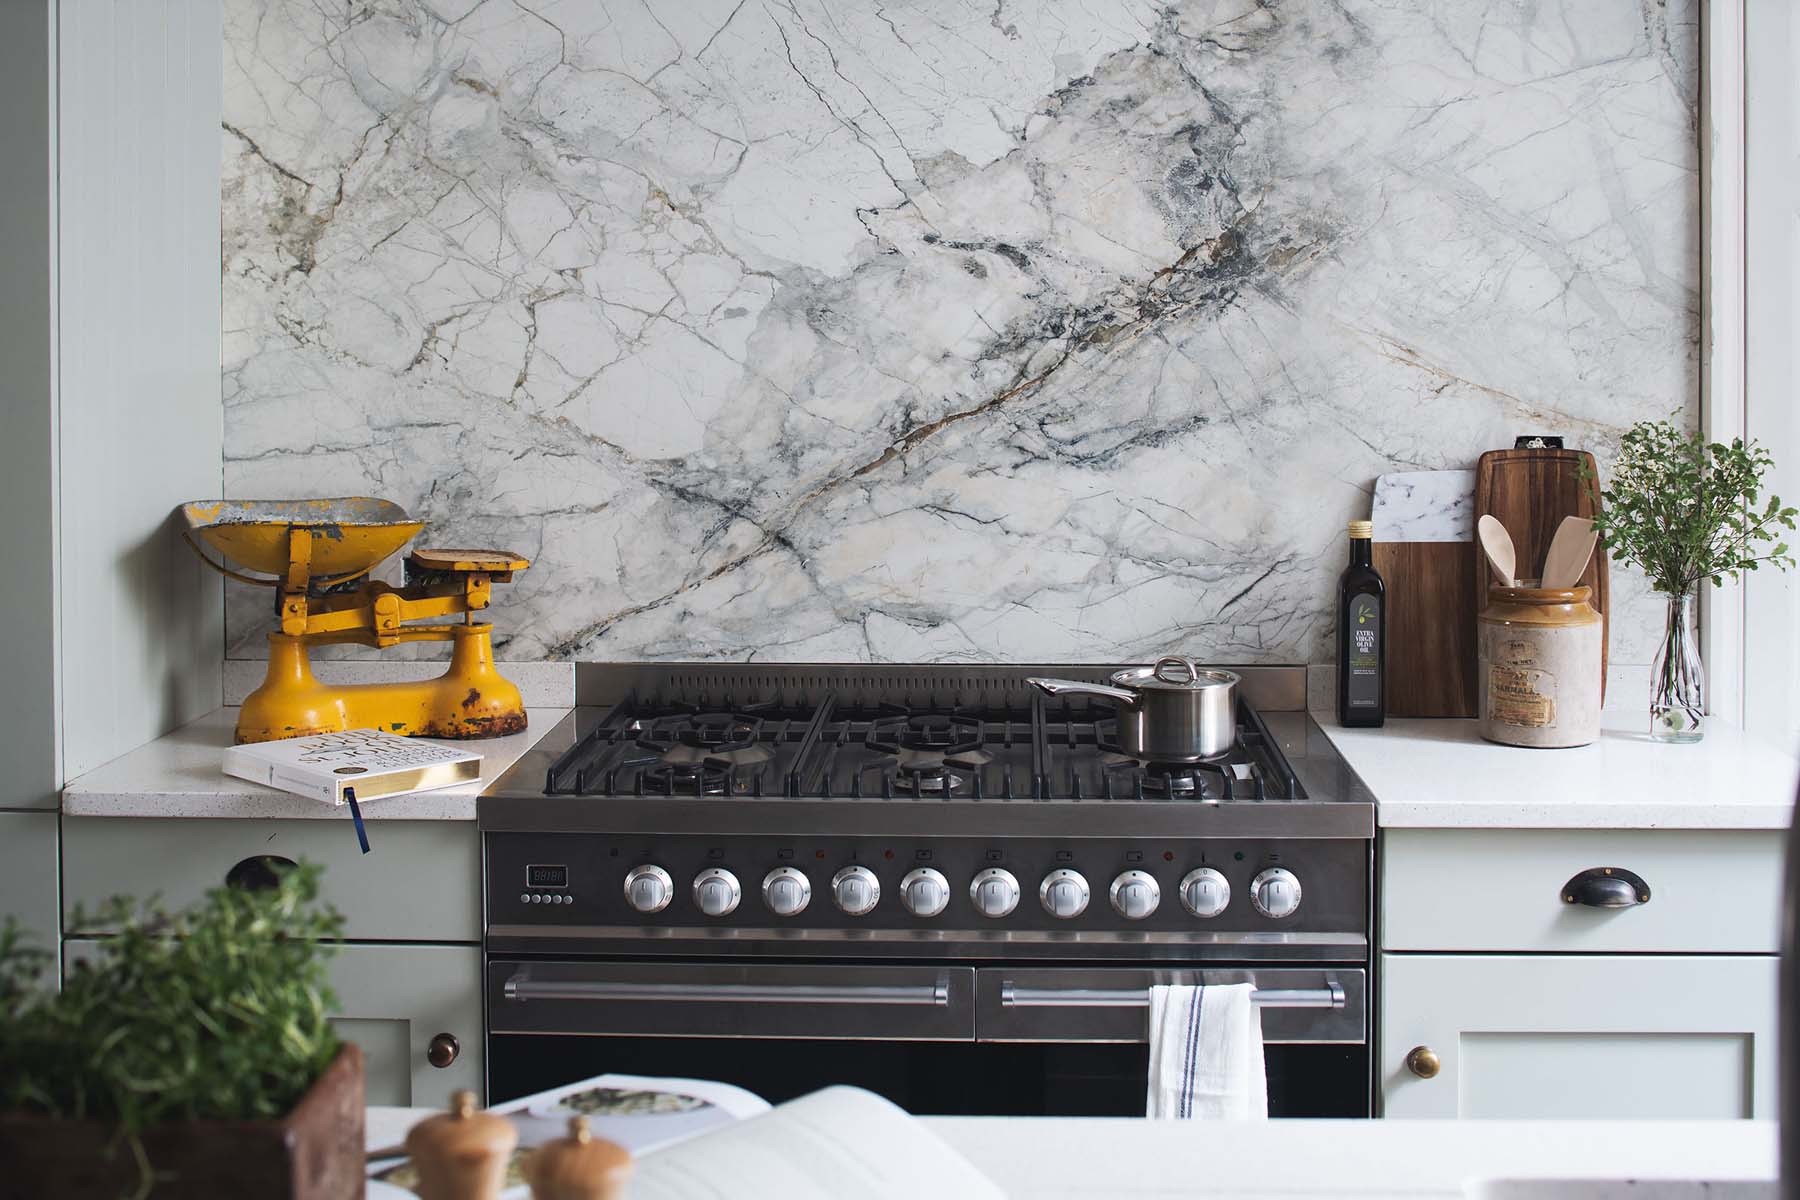 Hob oven and marble backdrop